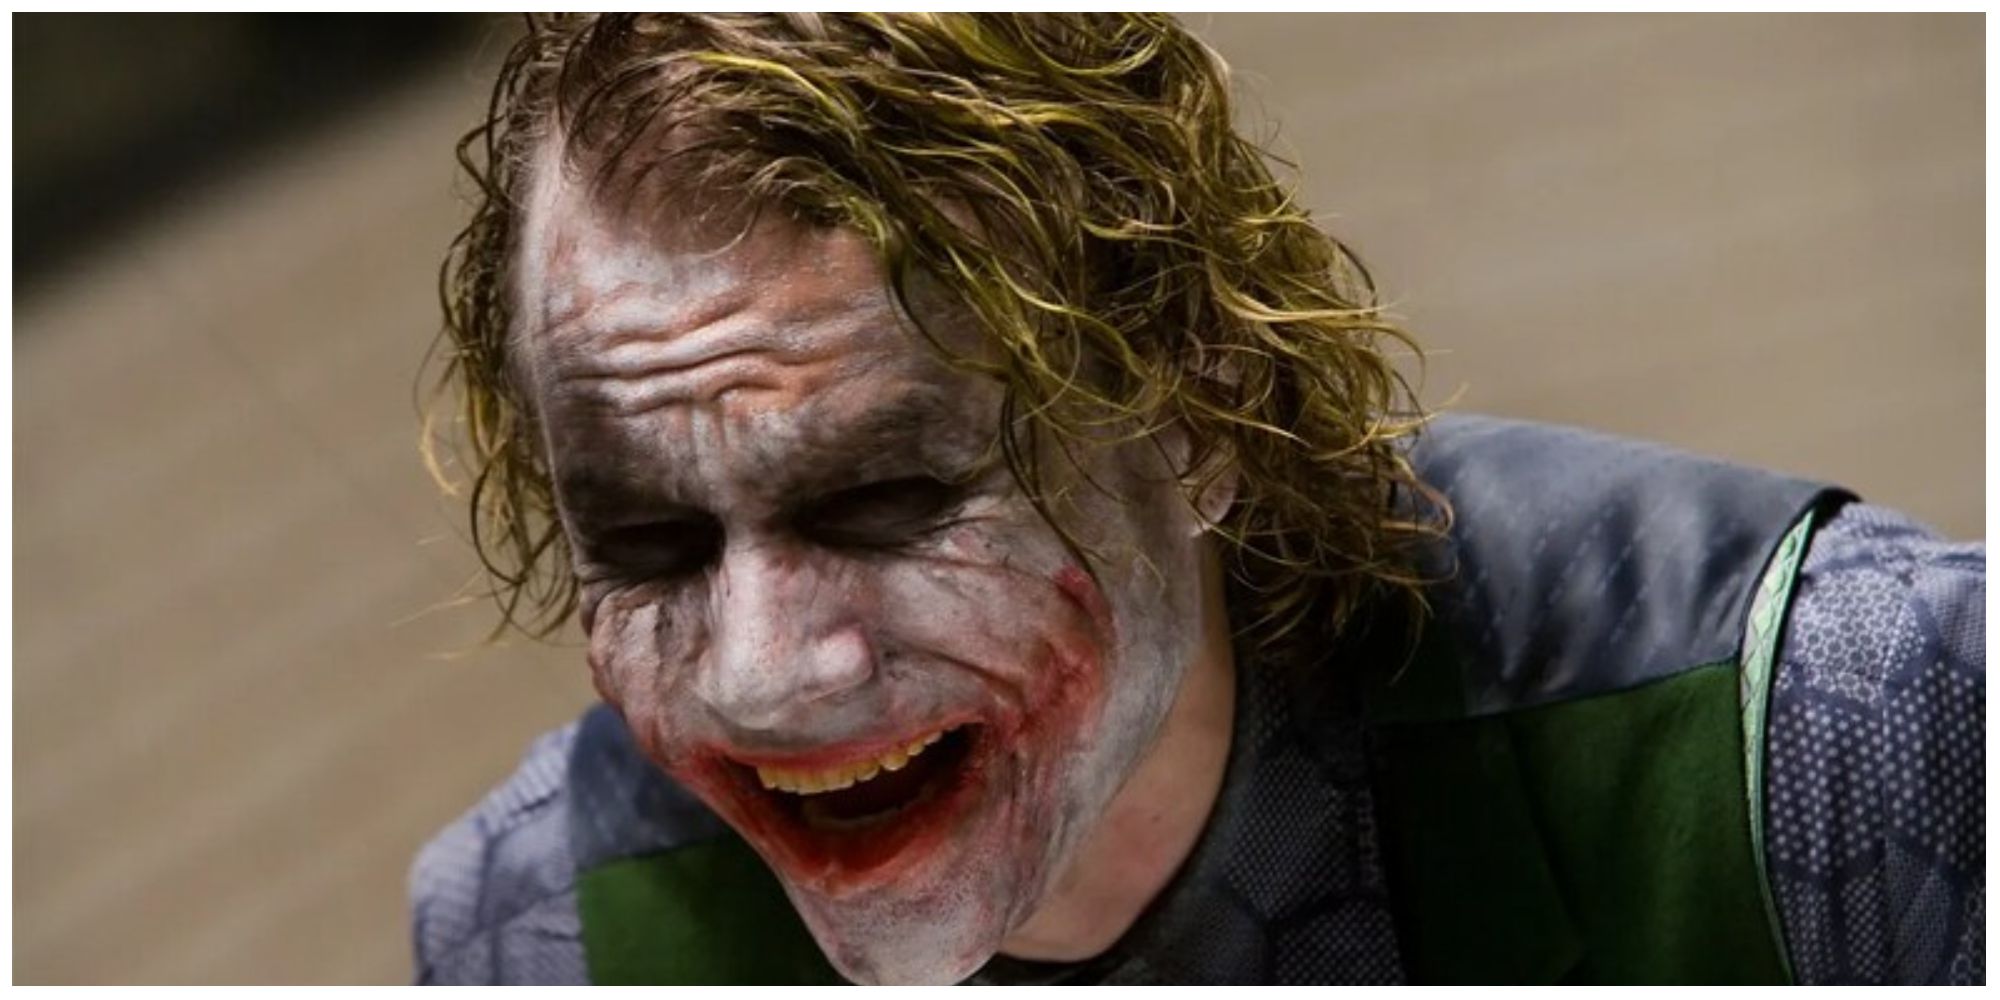 The Joker in the Dark Knight laughing while being interrogated